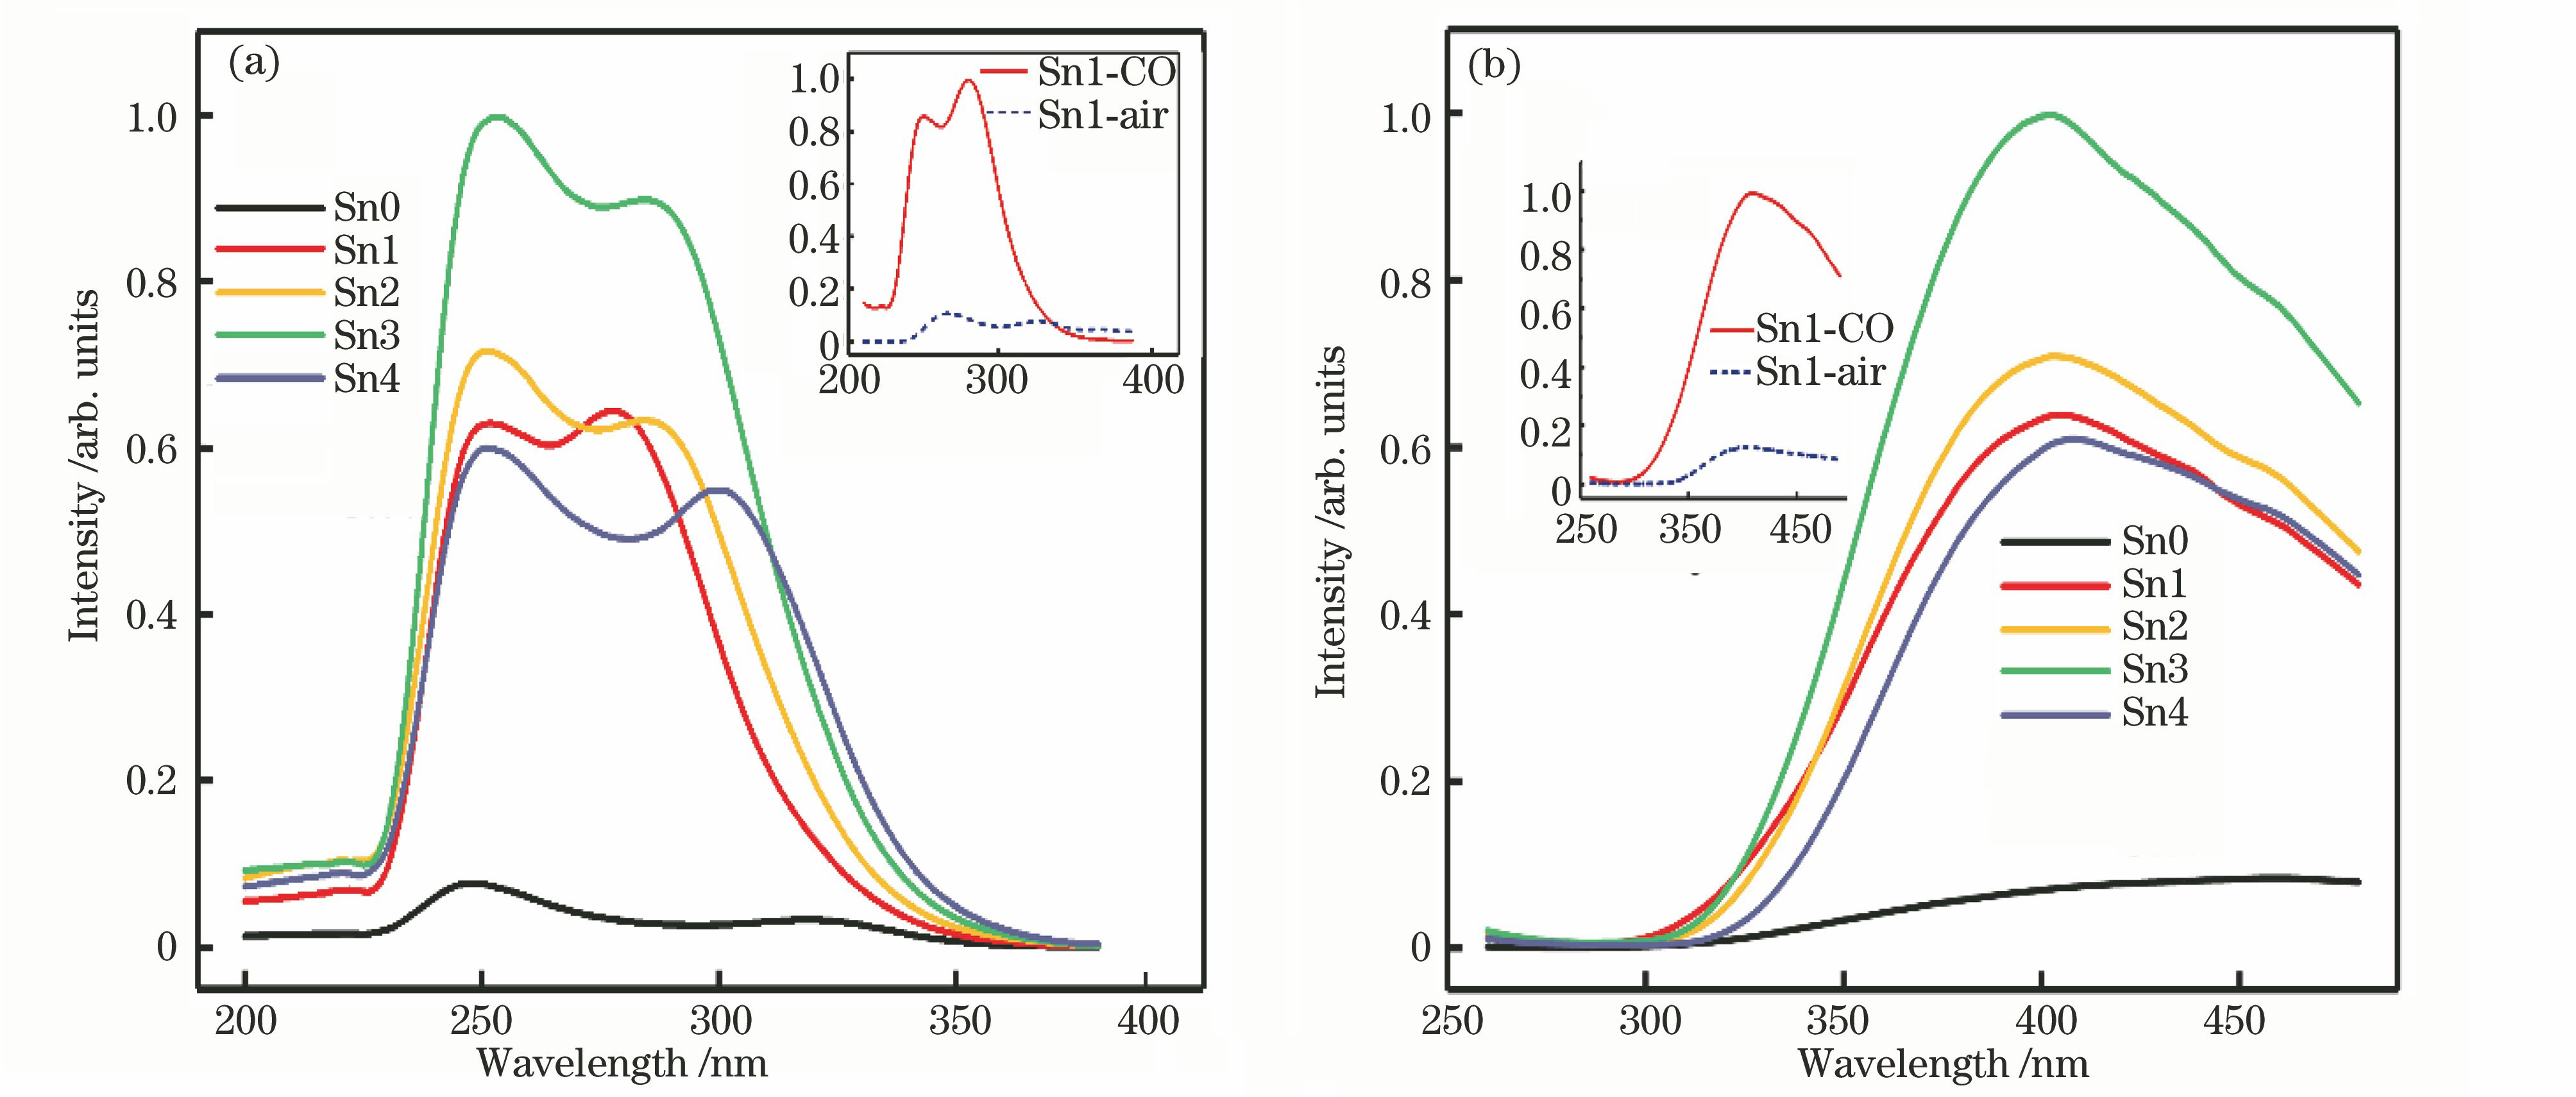 Excitation spectra and emission spectra of un-doped Si-B glass and Si-B glasses doped with different Sn2+ concentrations. (a) Excitation spectra at detection wavelength of 409 nm; (b) emission spectra at excitation wavelength of 252 nm